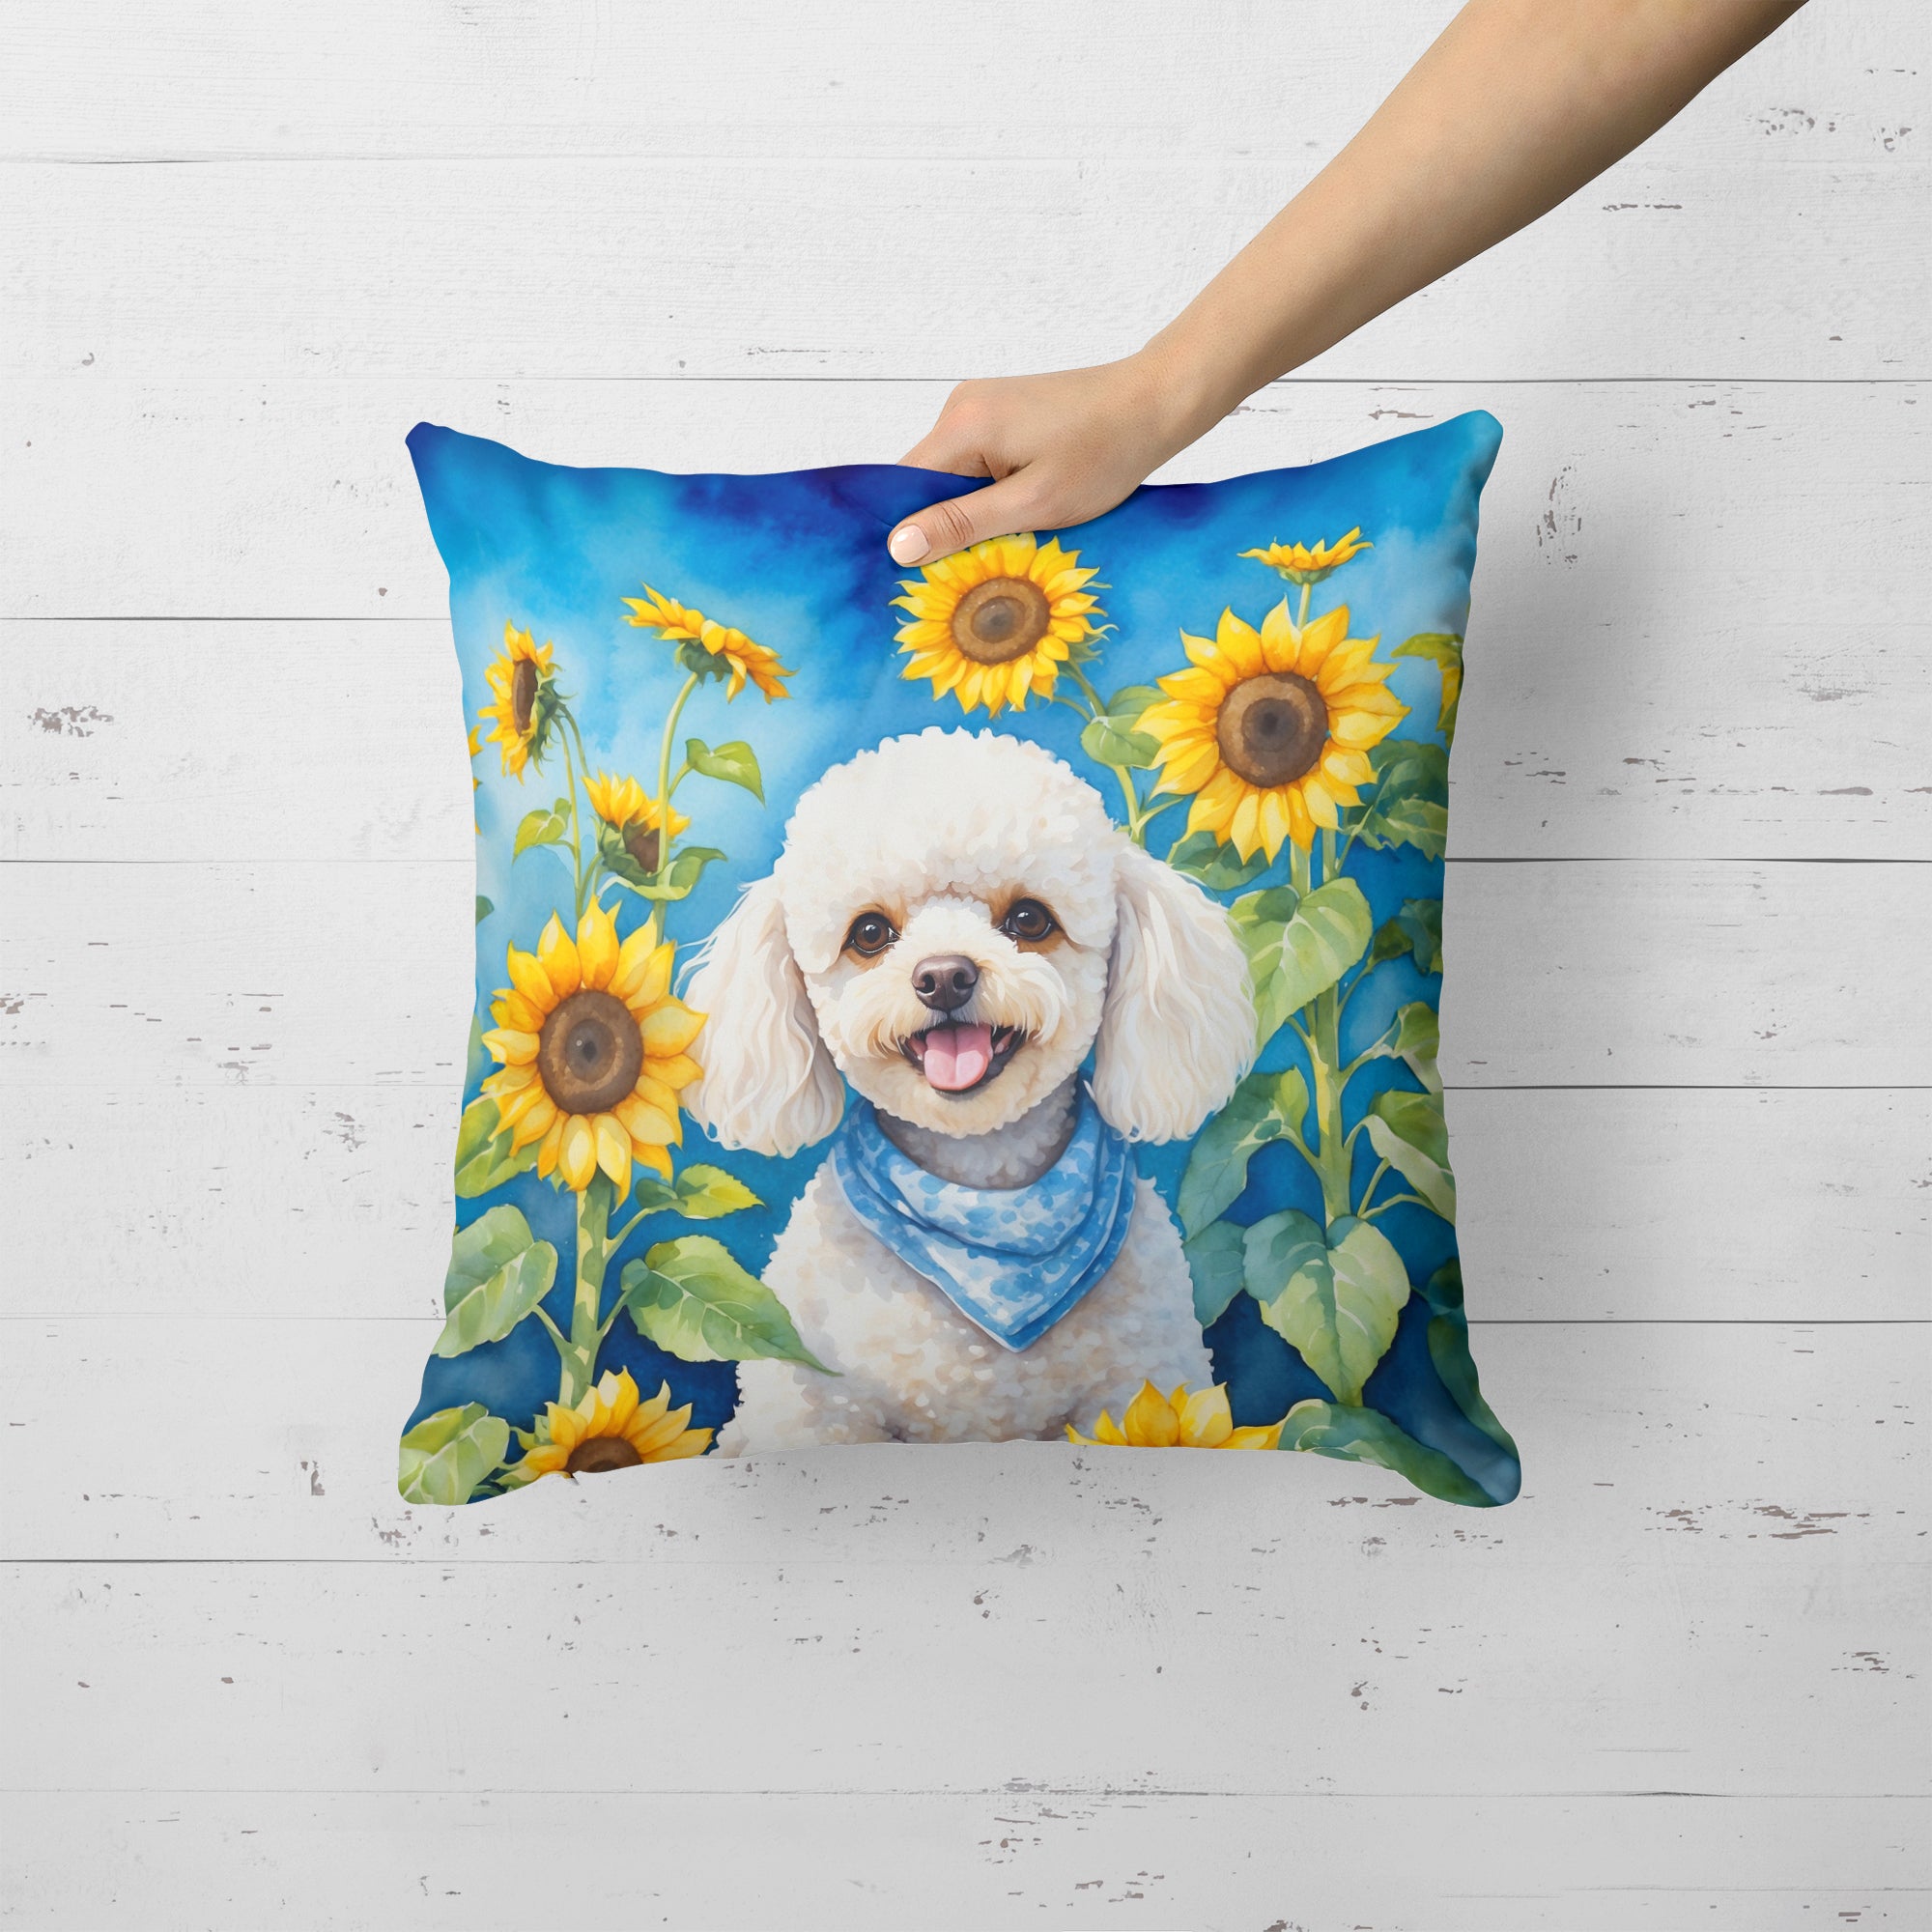 Buy this White Poodle in Sunflowers Throw Pillow